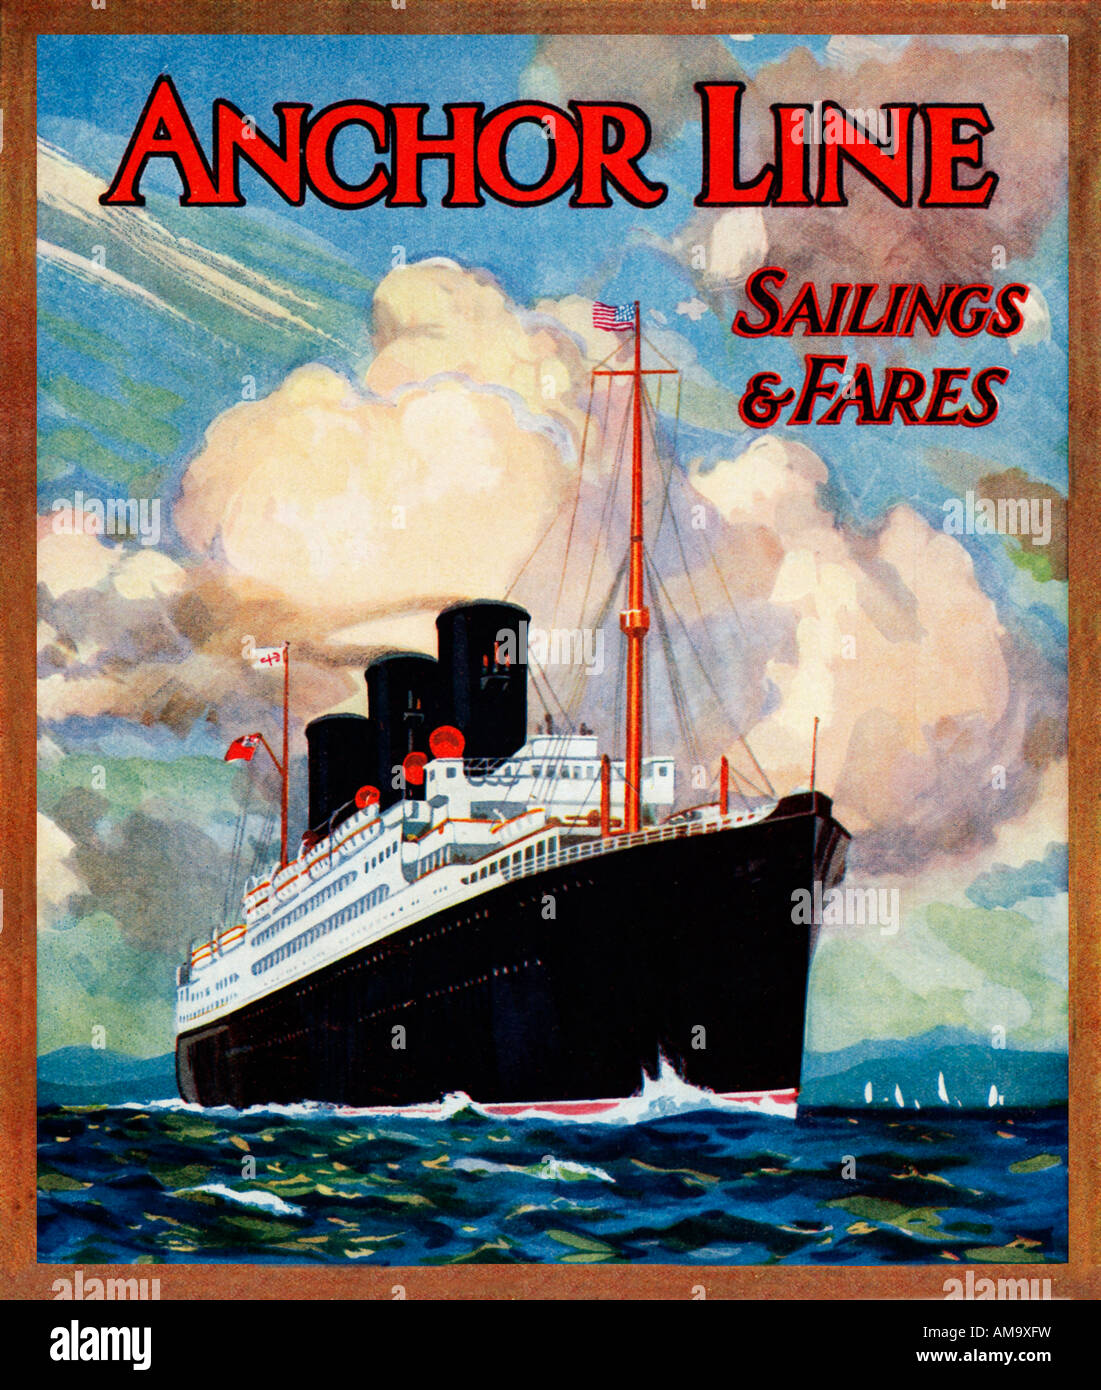 Anchor Line, 1930 brochure cover for the Glasgow to New York transatlantic service, giving details of sailings and fares Stock Photo